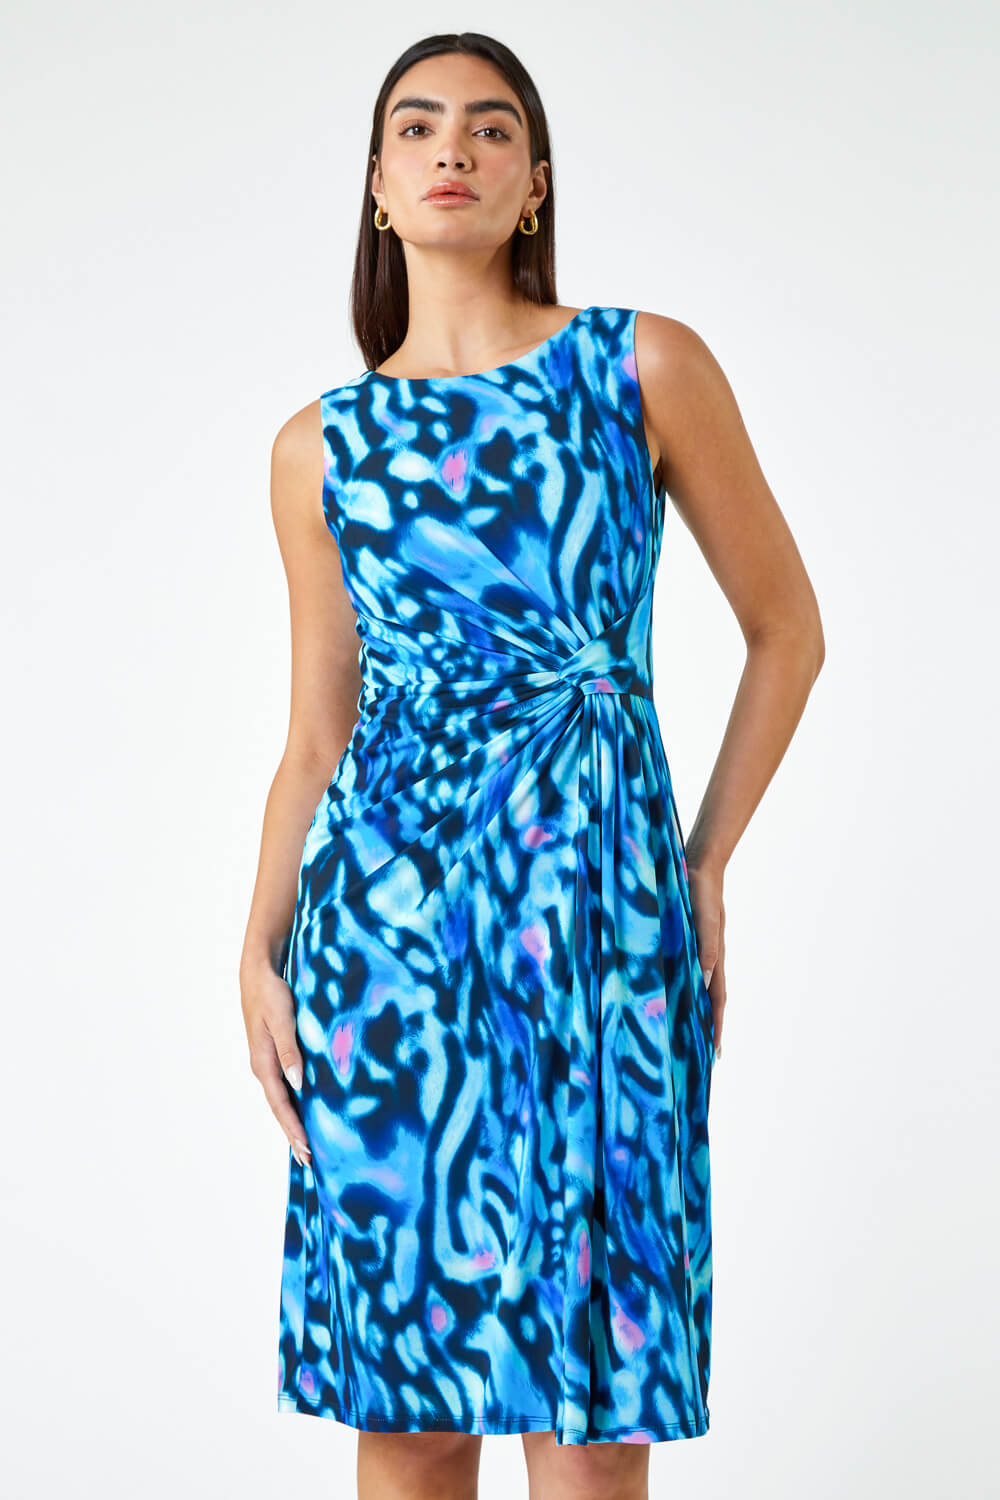 Blue LIMITED Animal Twist Detail Ruched Dress, Image 2 of 5